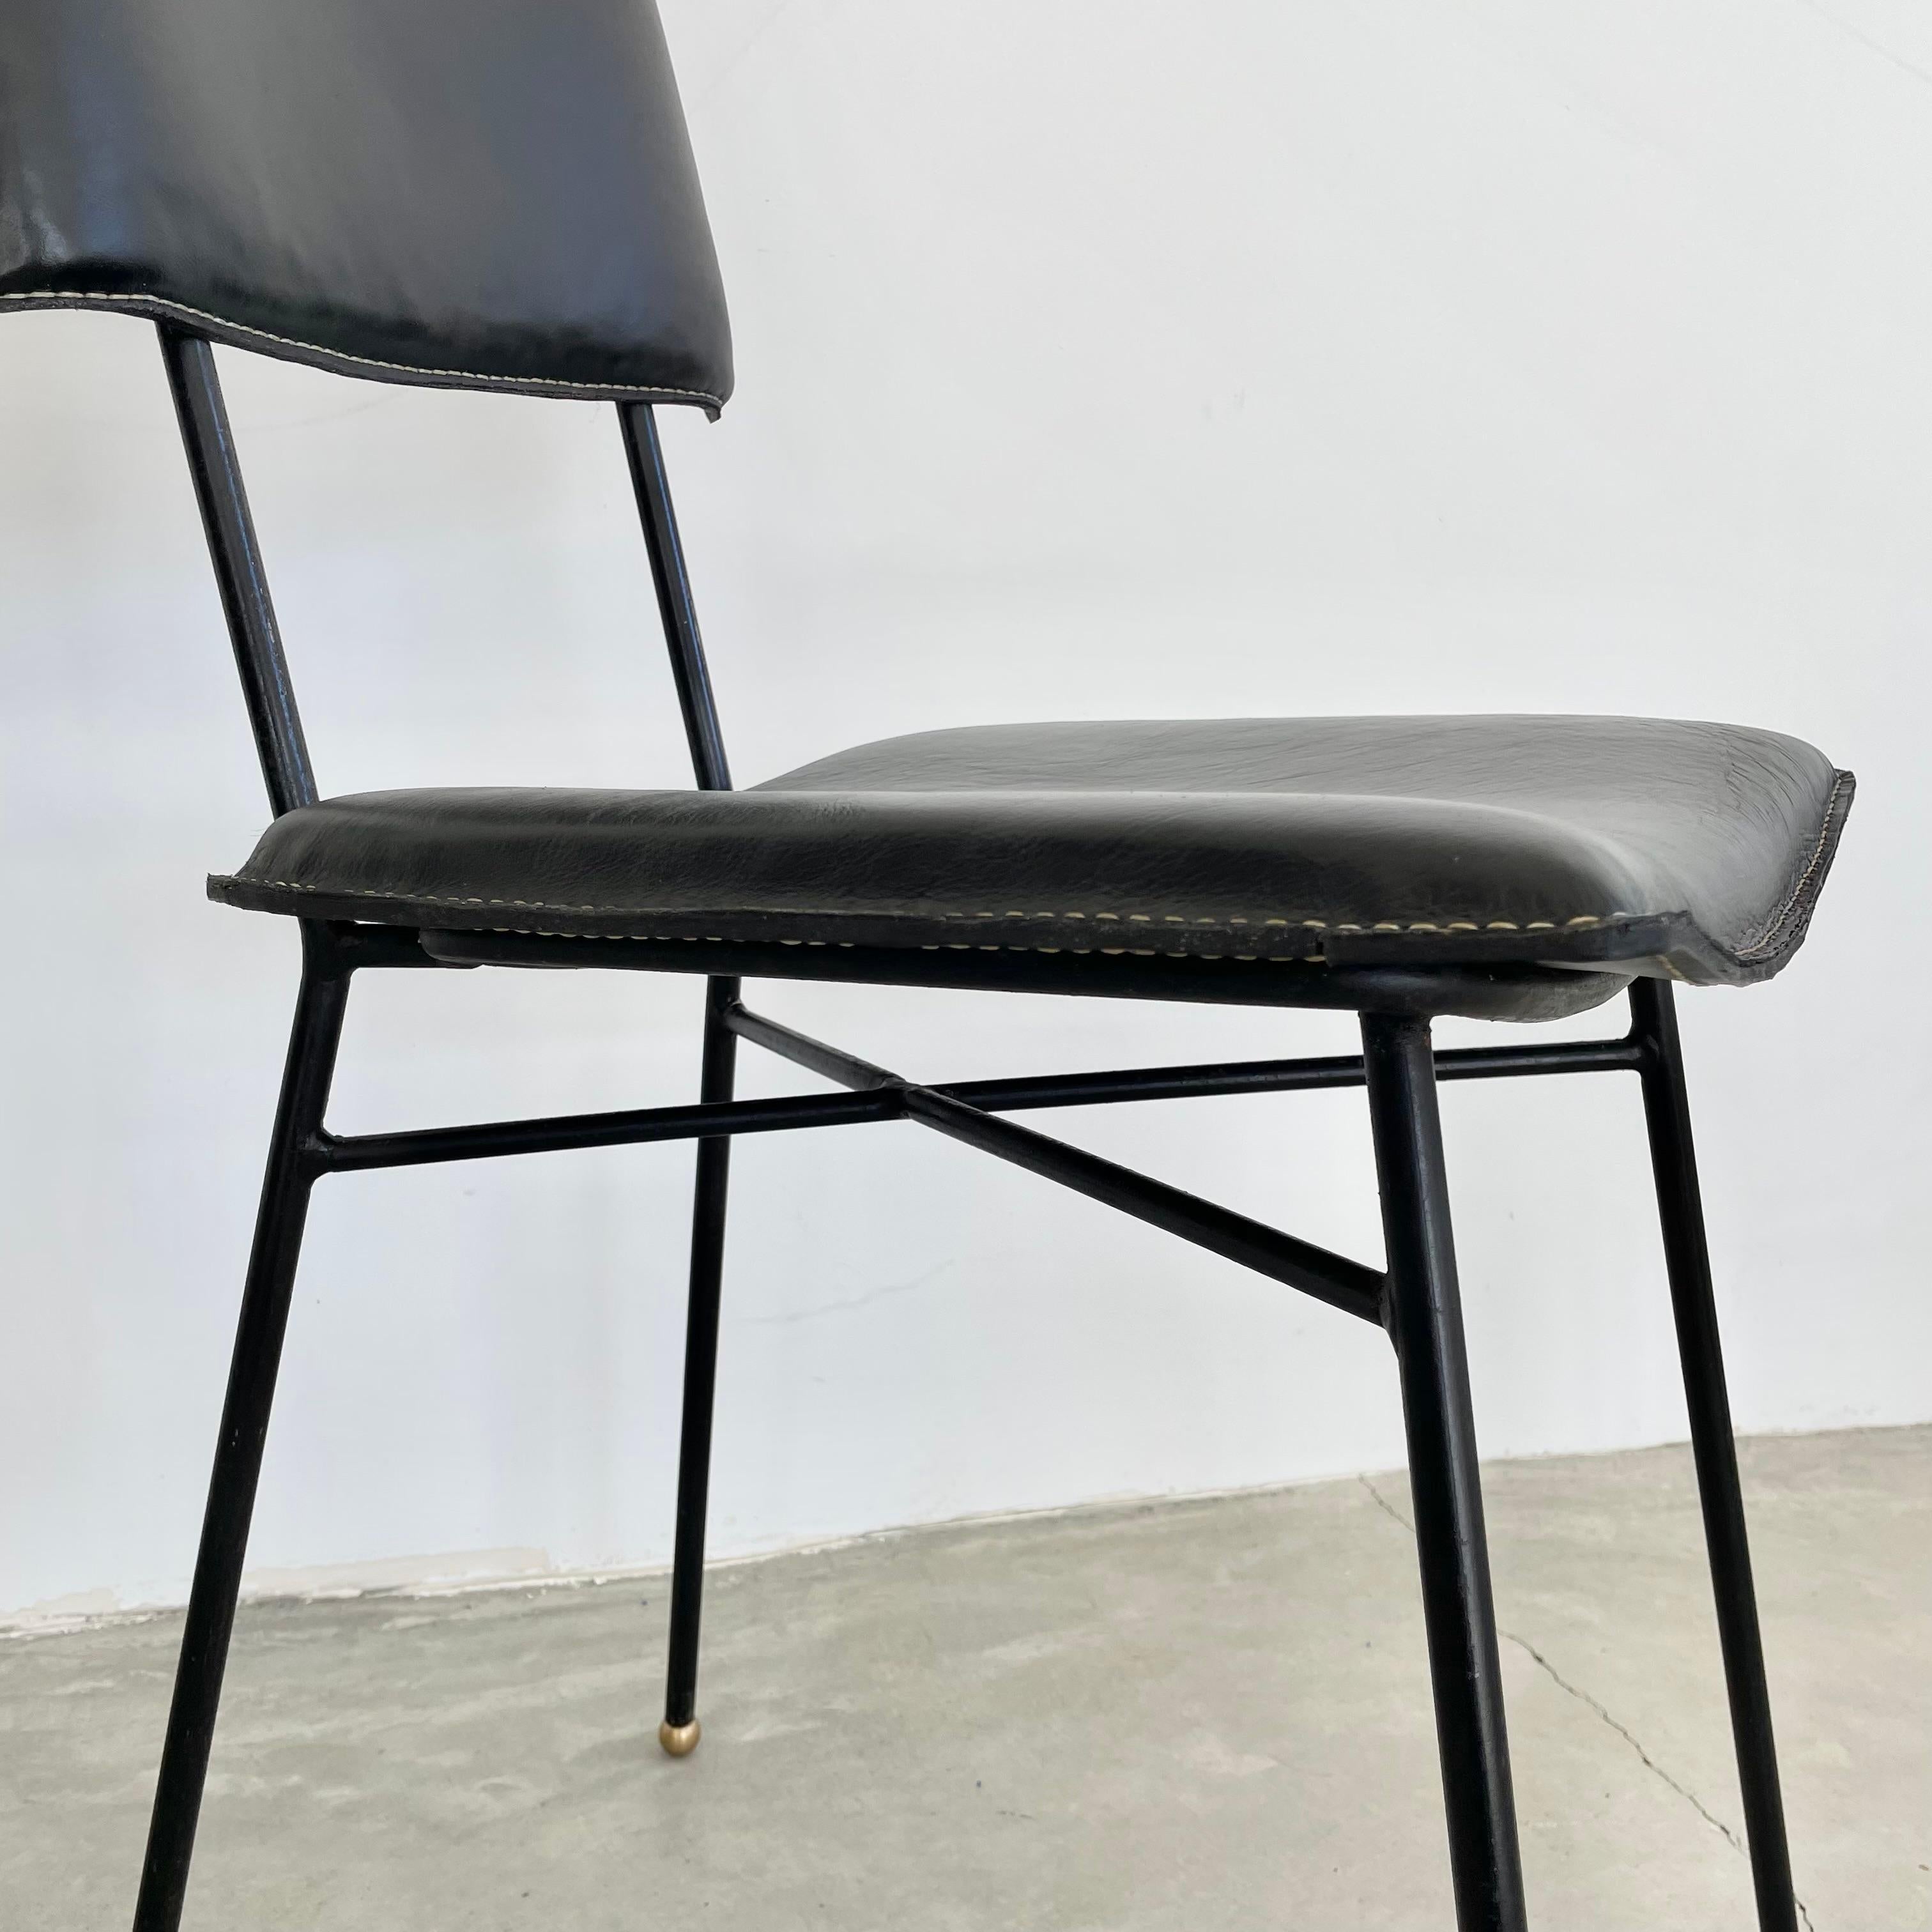 Metal Jacques Adnet Black Leather Chair, 1950s France For Sale